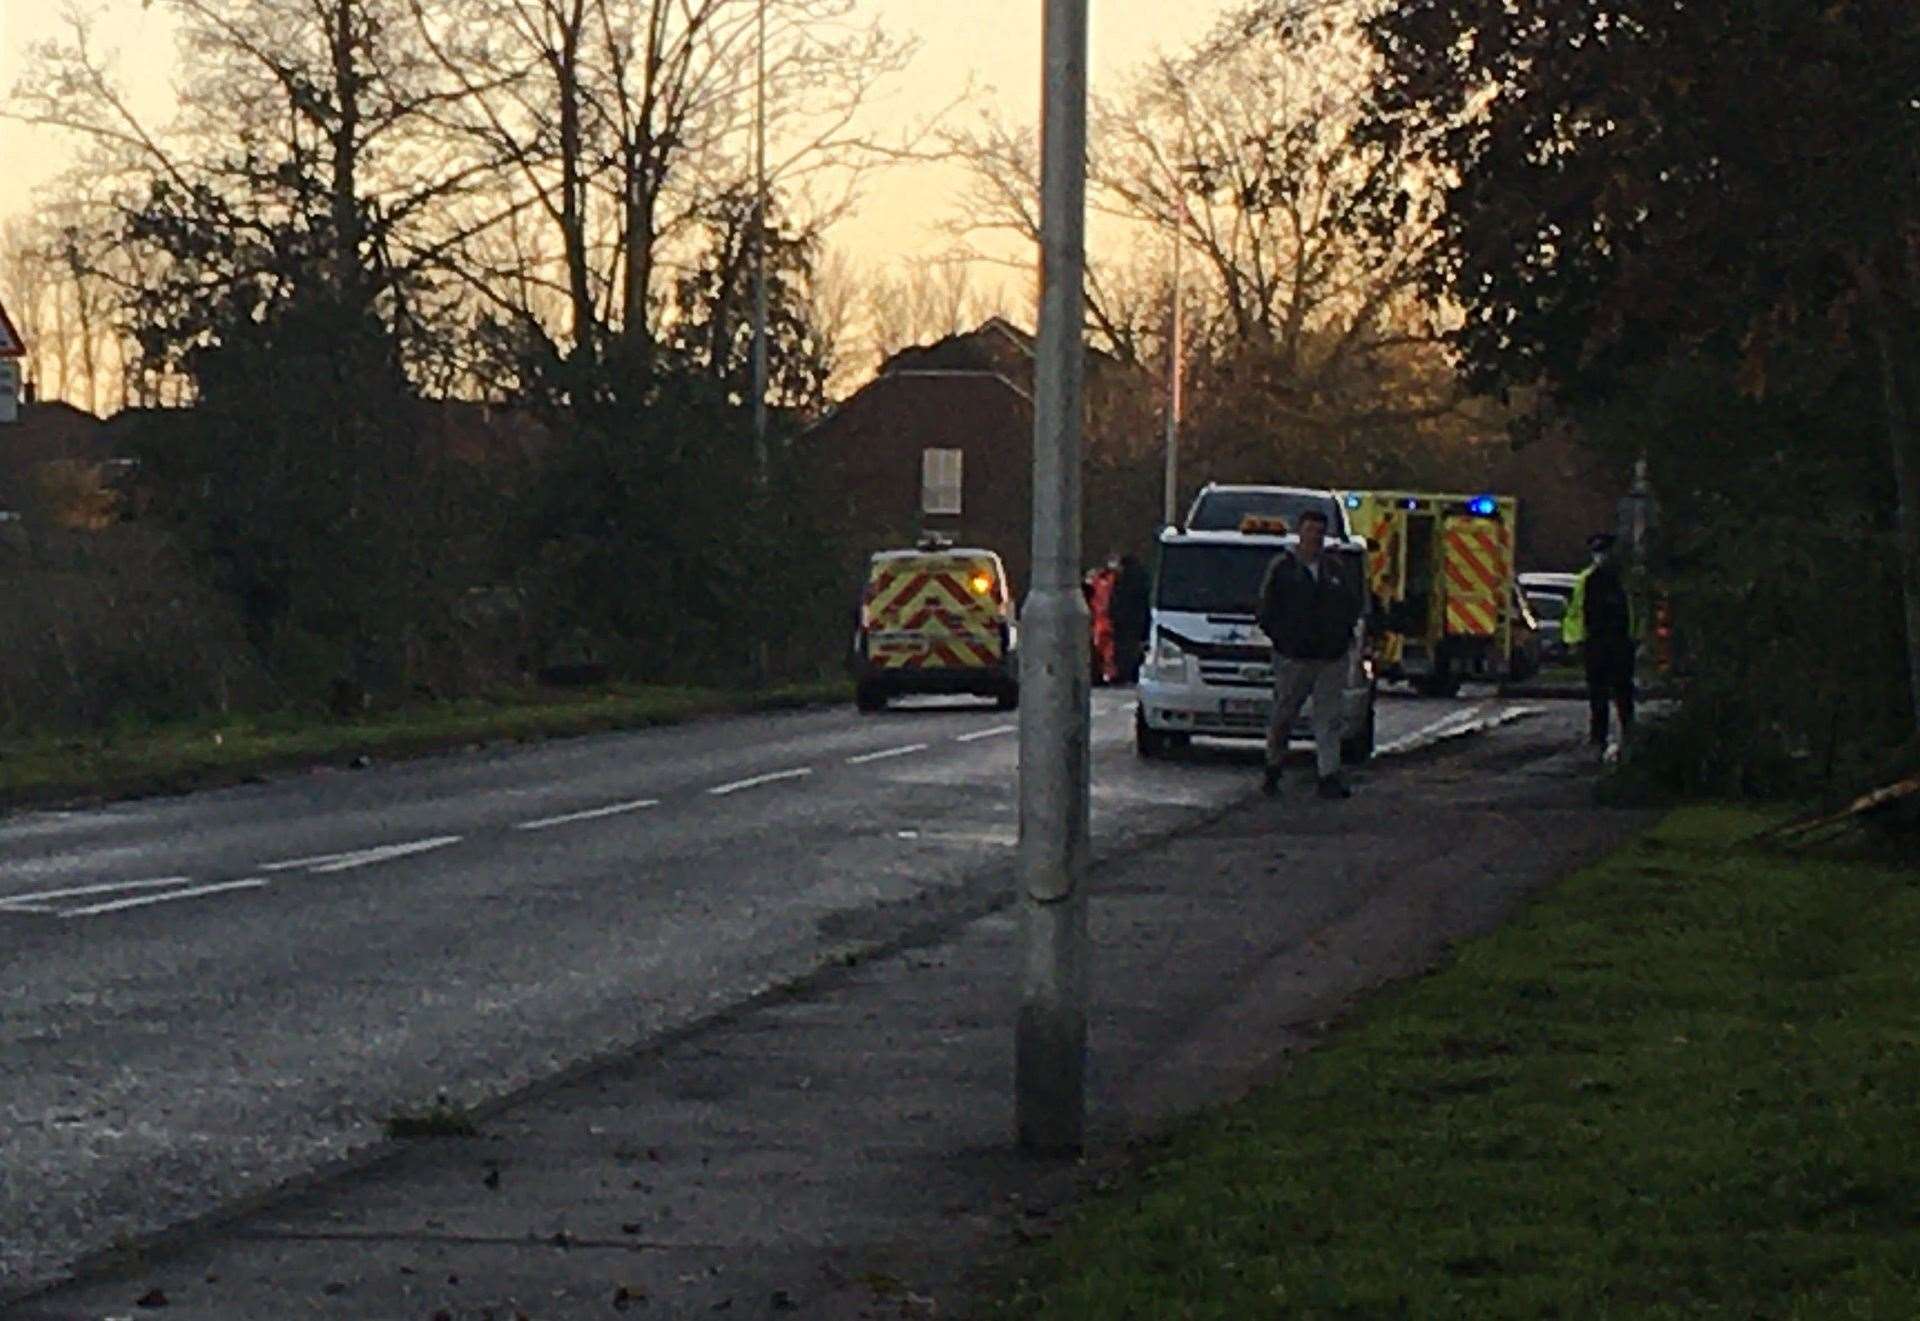 The air ambulance, paramedics and police were called but could not revive the biker who died at the scene